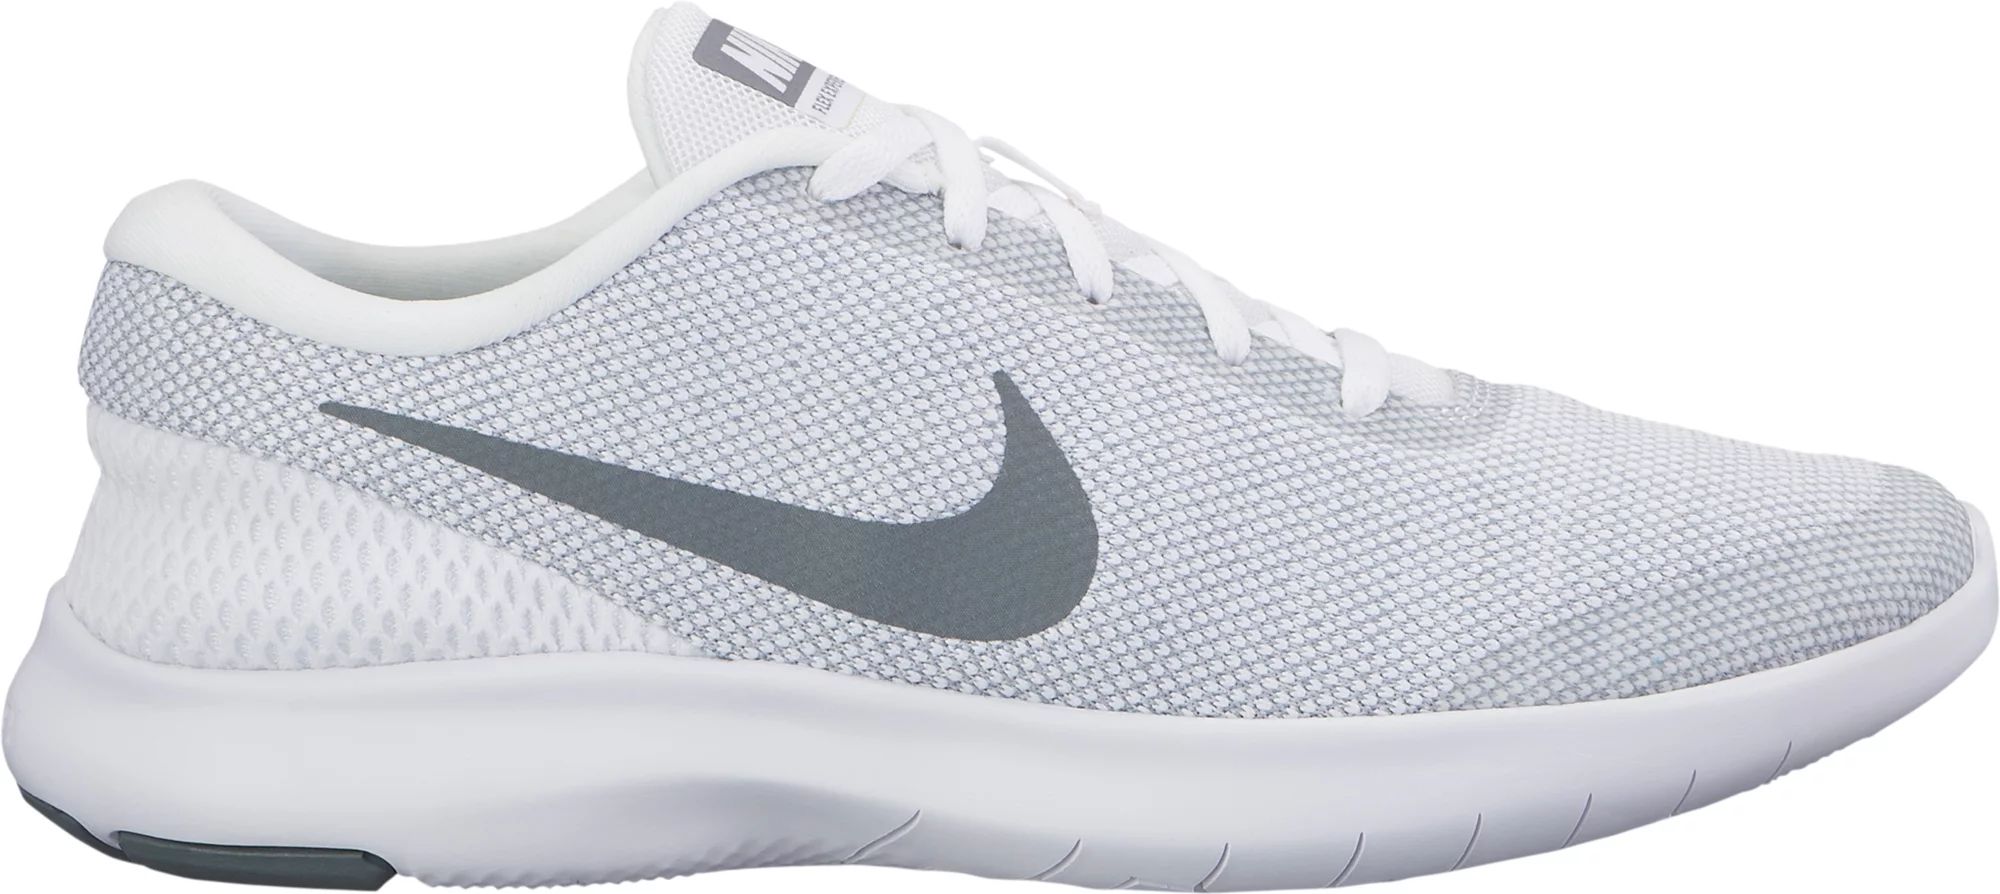 Nike Women's Flex Experience RN 7 Running Shoes, Size: 6.0, White | Dick's Sporting Goods